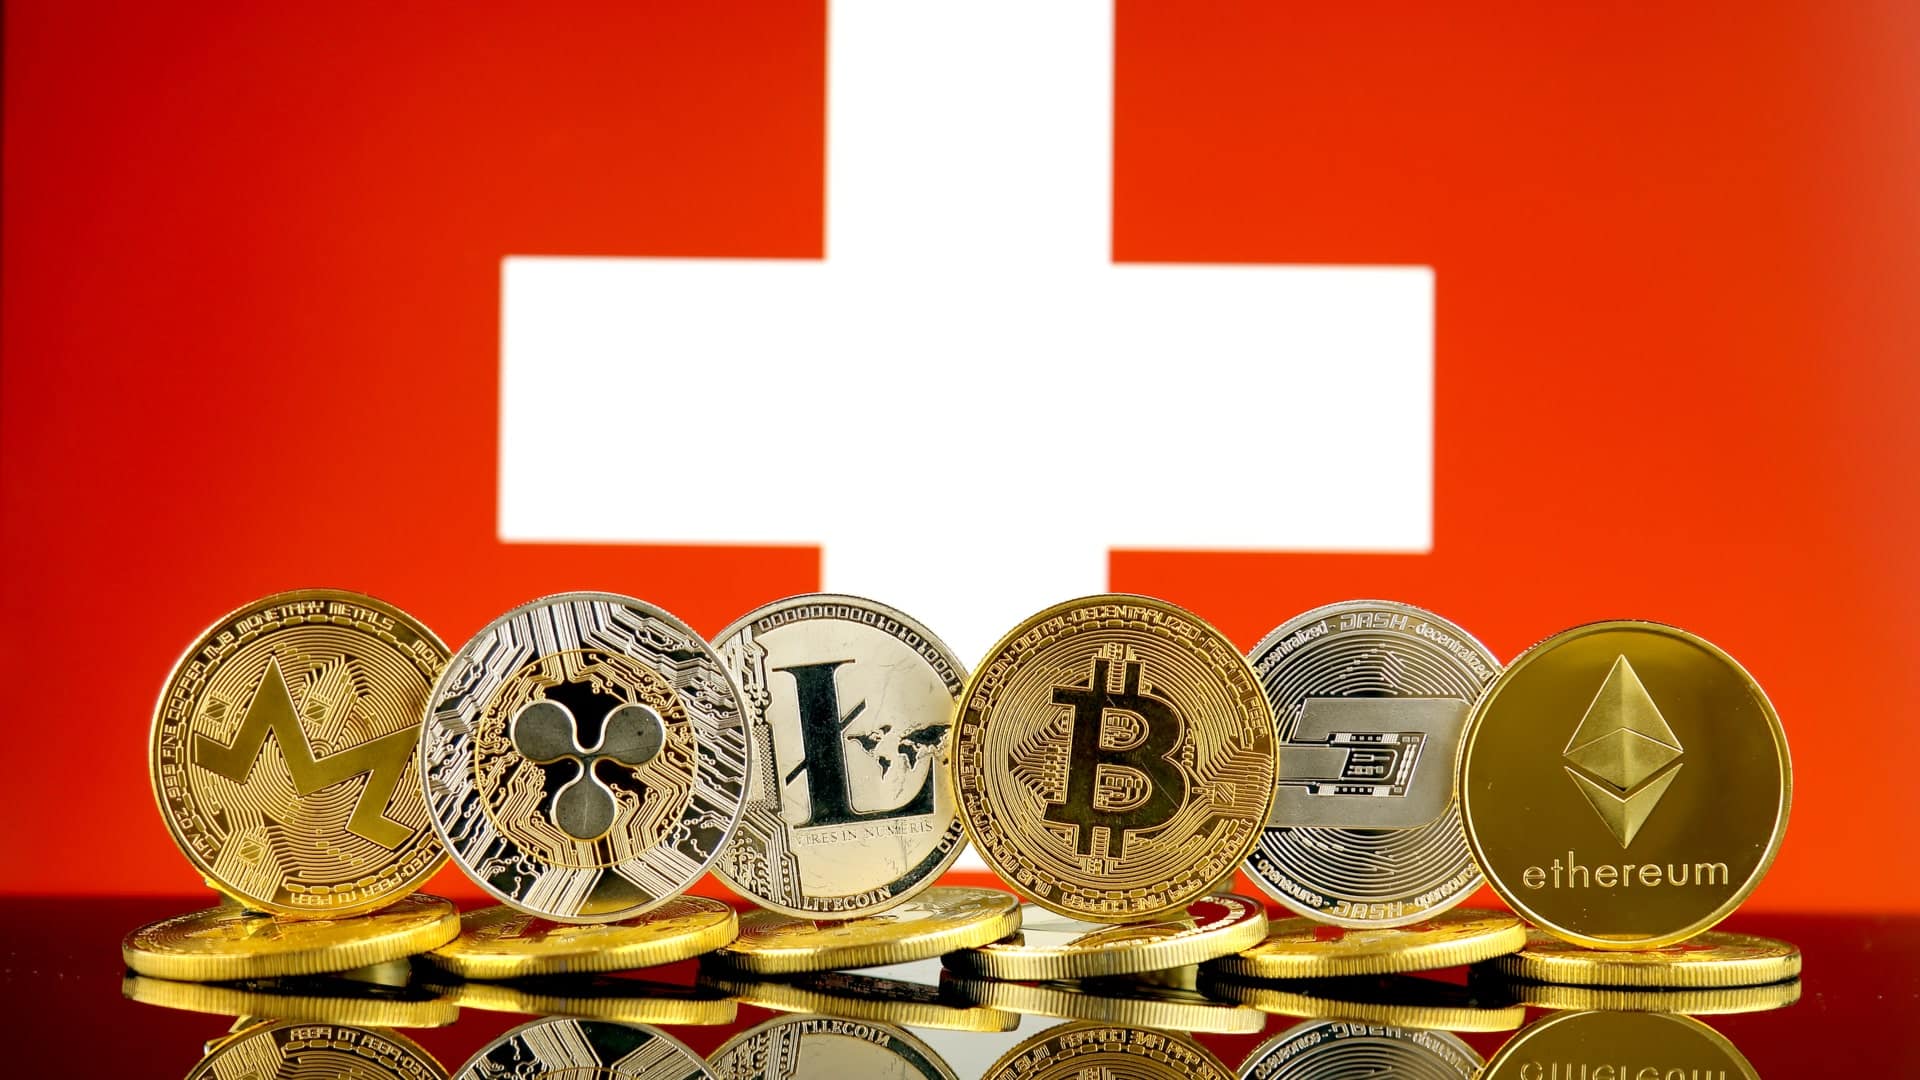 Switzerland has approved the first crypto fund